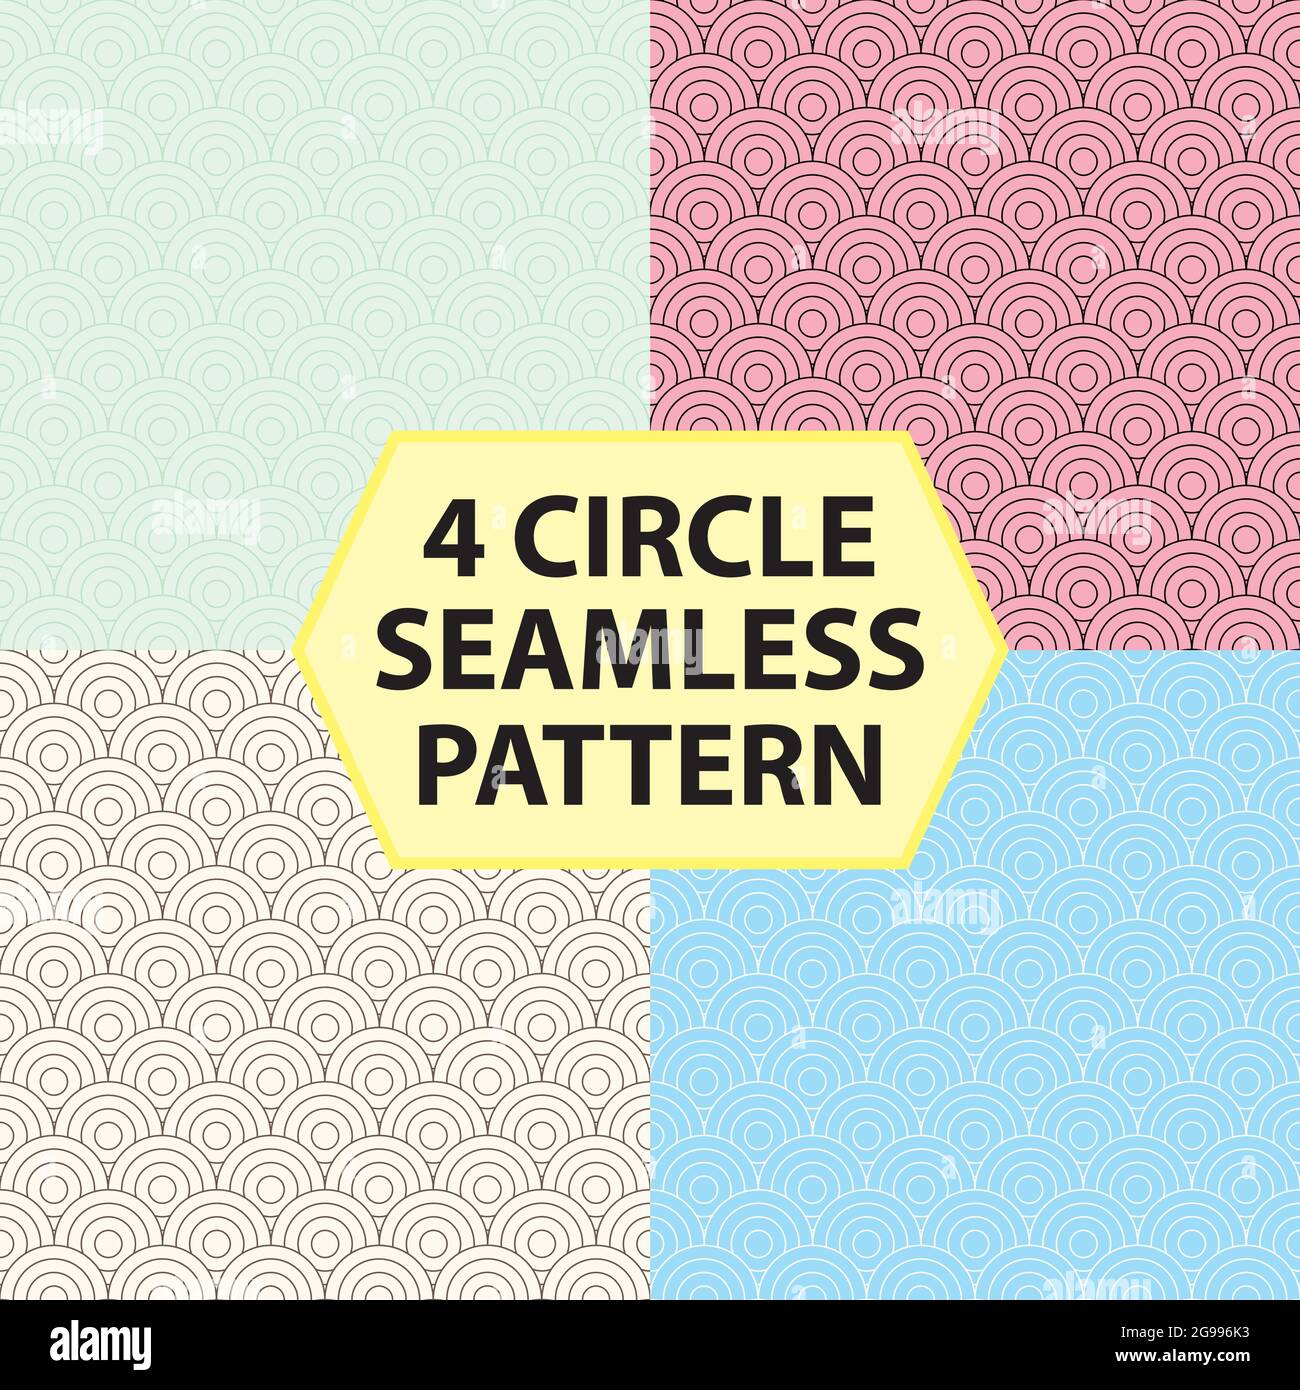 FOUR  CIRCLE SEAMLESS PATTERN BUNDLES. GET IT NOW IN ONE PRICE Stock Vector